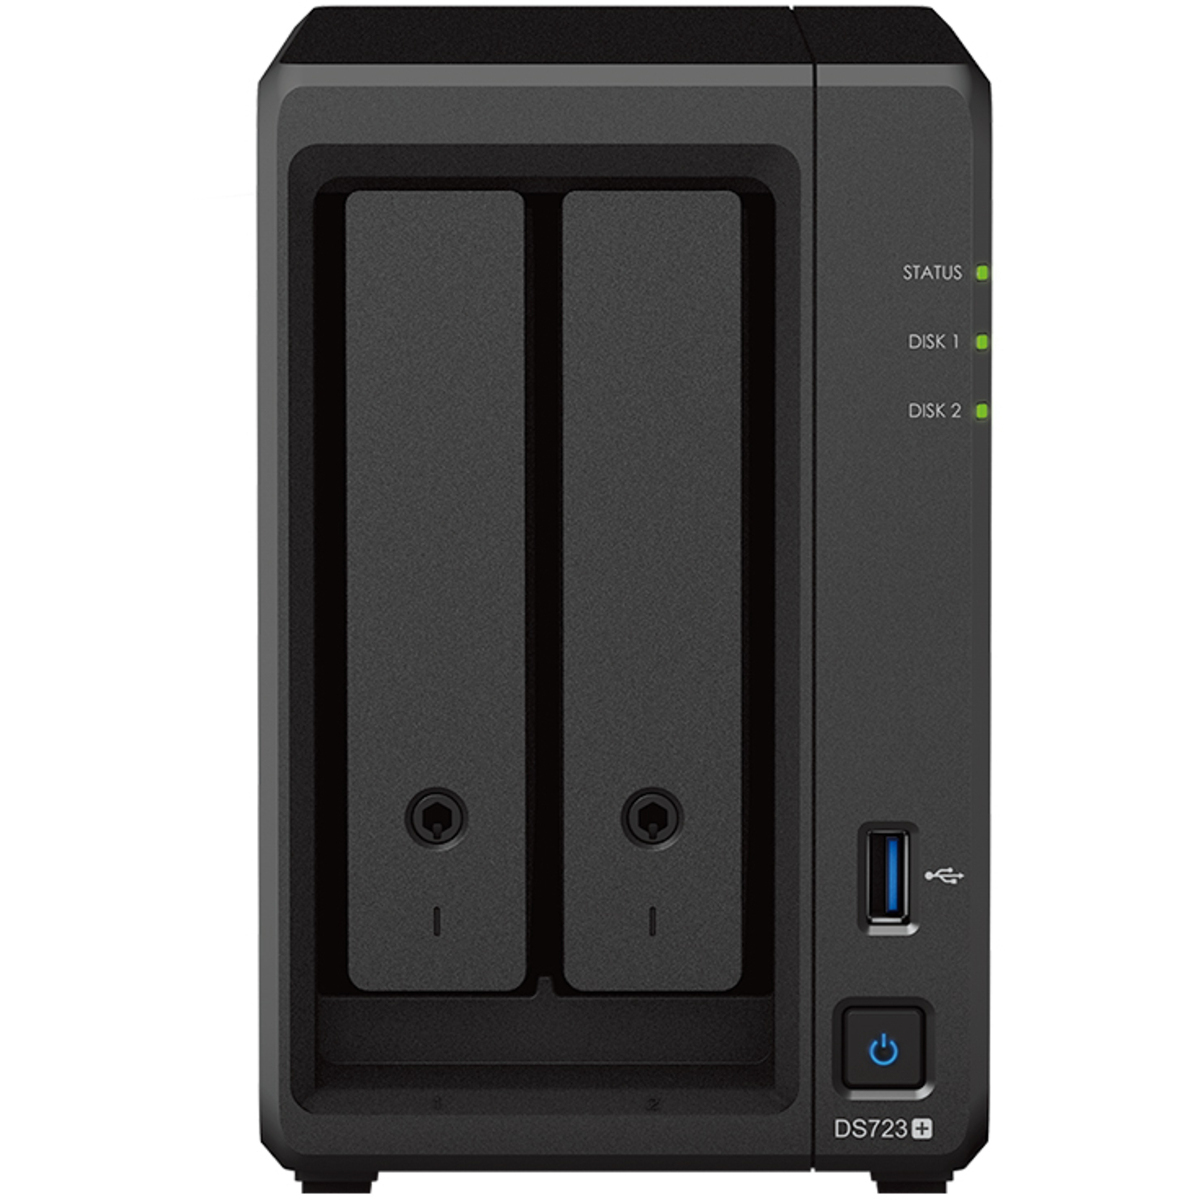 buy Synology DiskStation DS723+ 44tb Desktop NAS - Network Attached Storage Device 2x22000gb Western Digital Ultrastar HC570 WUH722222ALE6L4 3.5 7200rpm SATA 6Gb/s HDD ENTERPRISE Class Drives Installed - Burn-In Tested - nas headquarters buy network attached storage server device das new raid-5 free shipping simply usa DiskStation DS723+